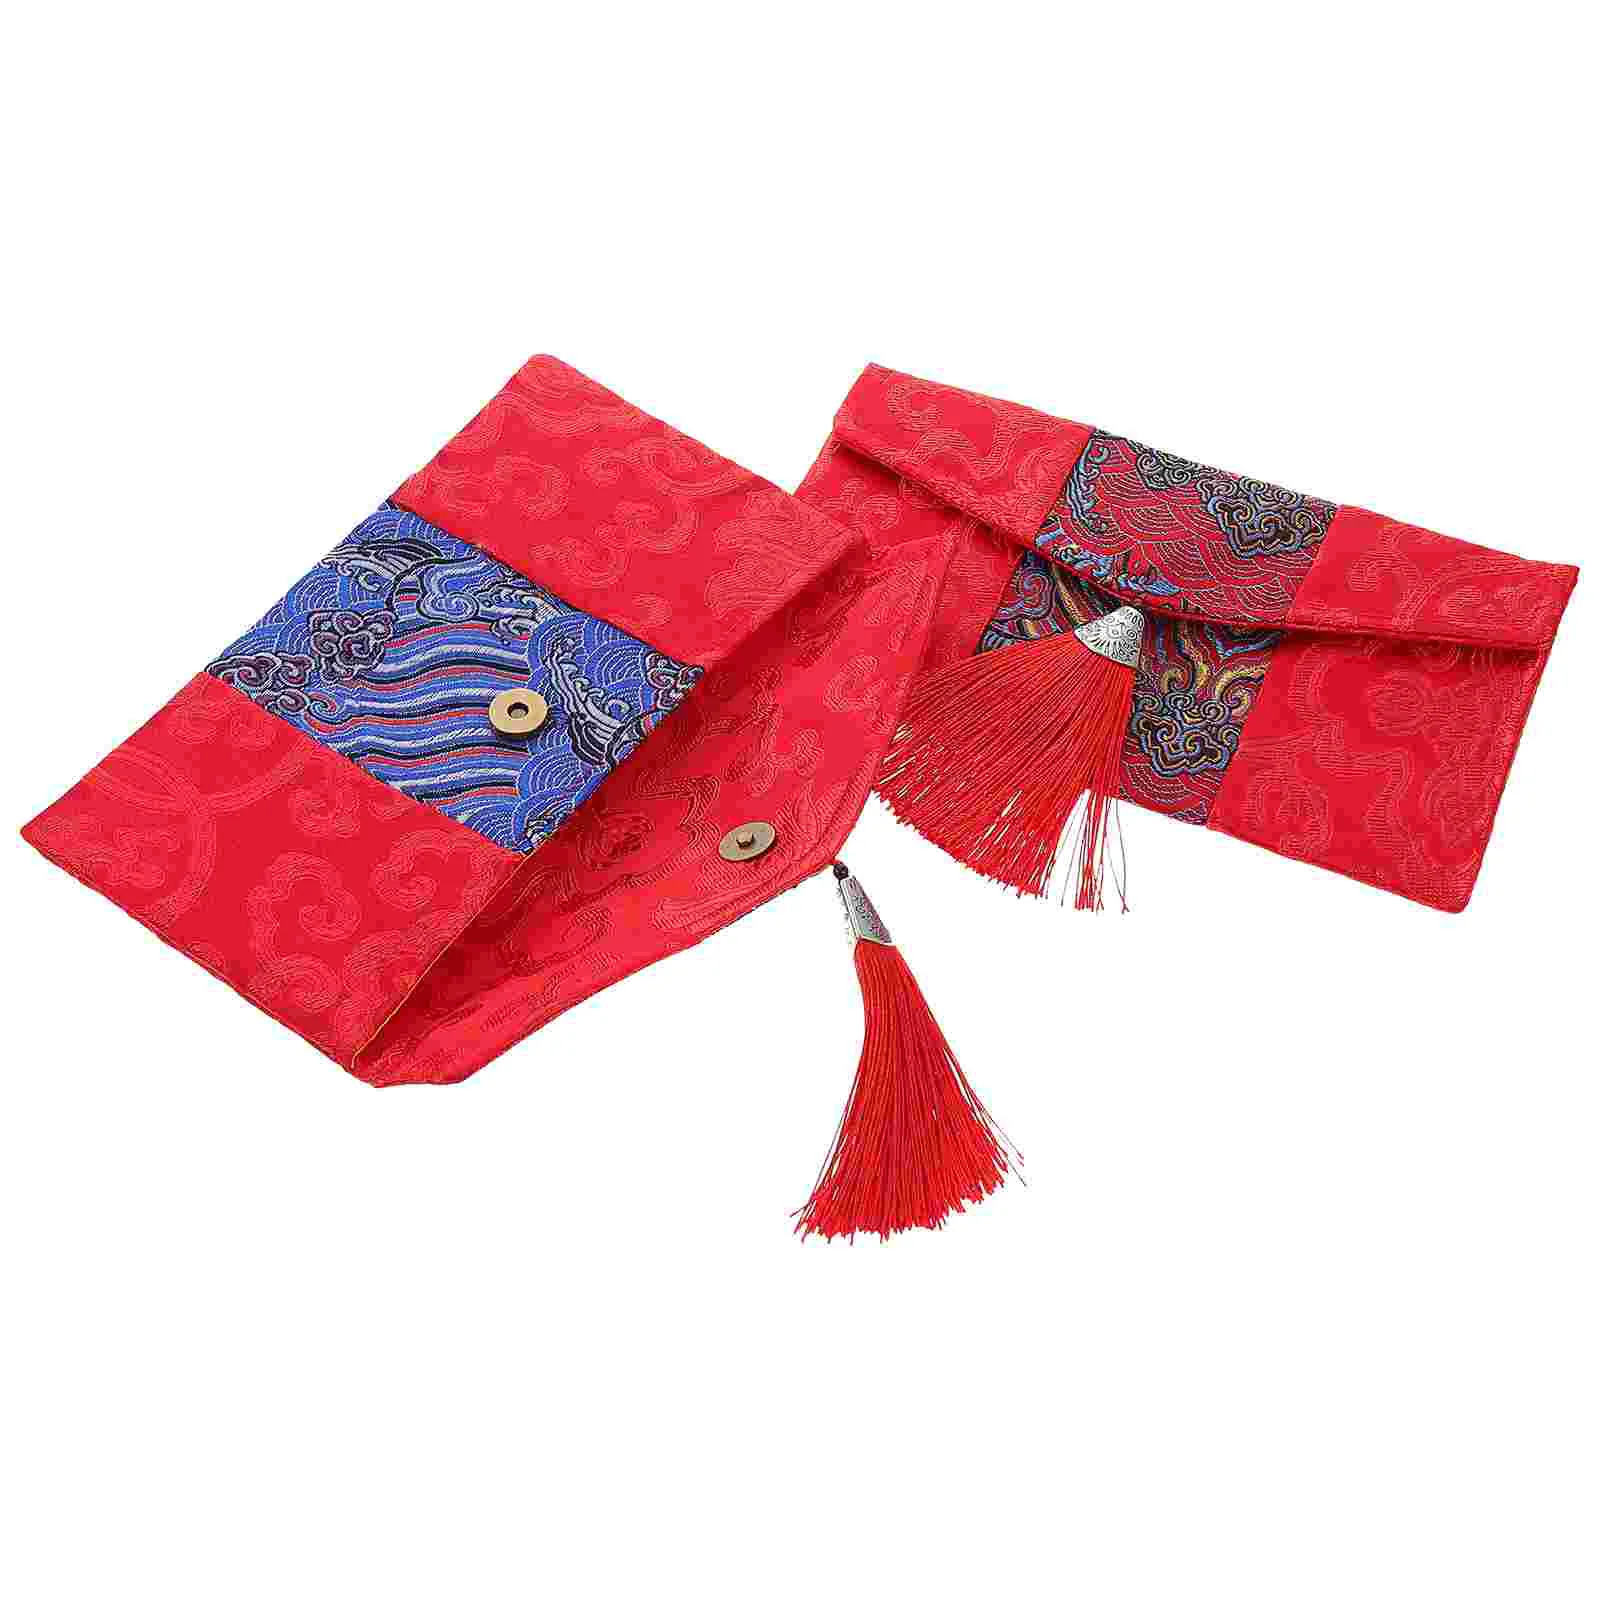 2 Pcs Chinese Fabric Red Envelope Spring Festival Silk Packets Wedding Purse Money Bag Style